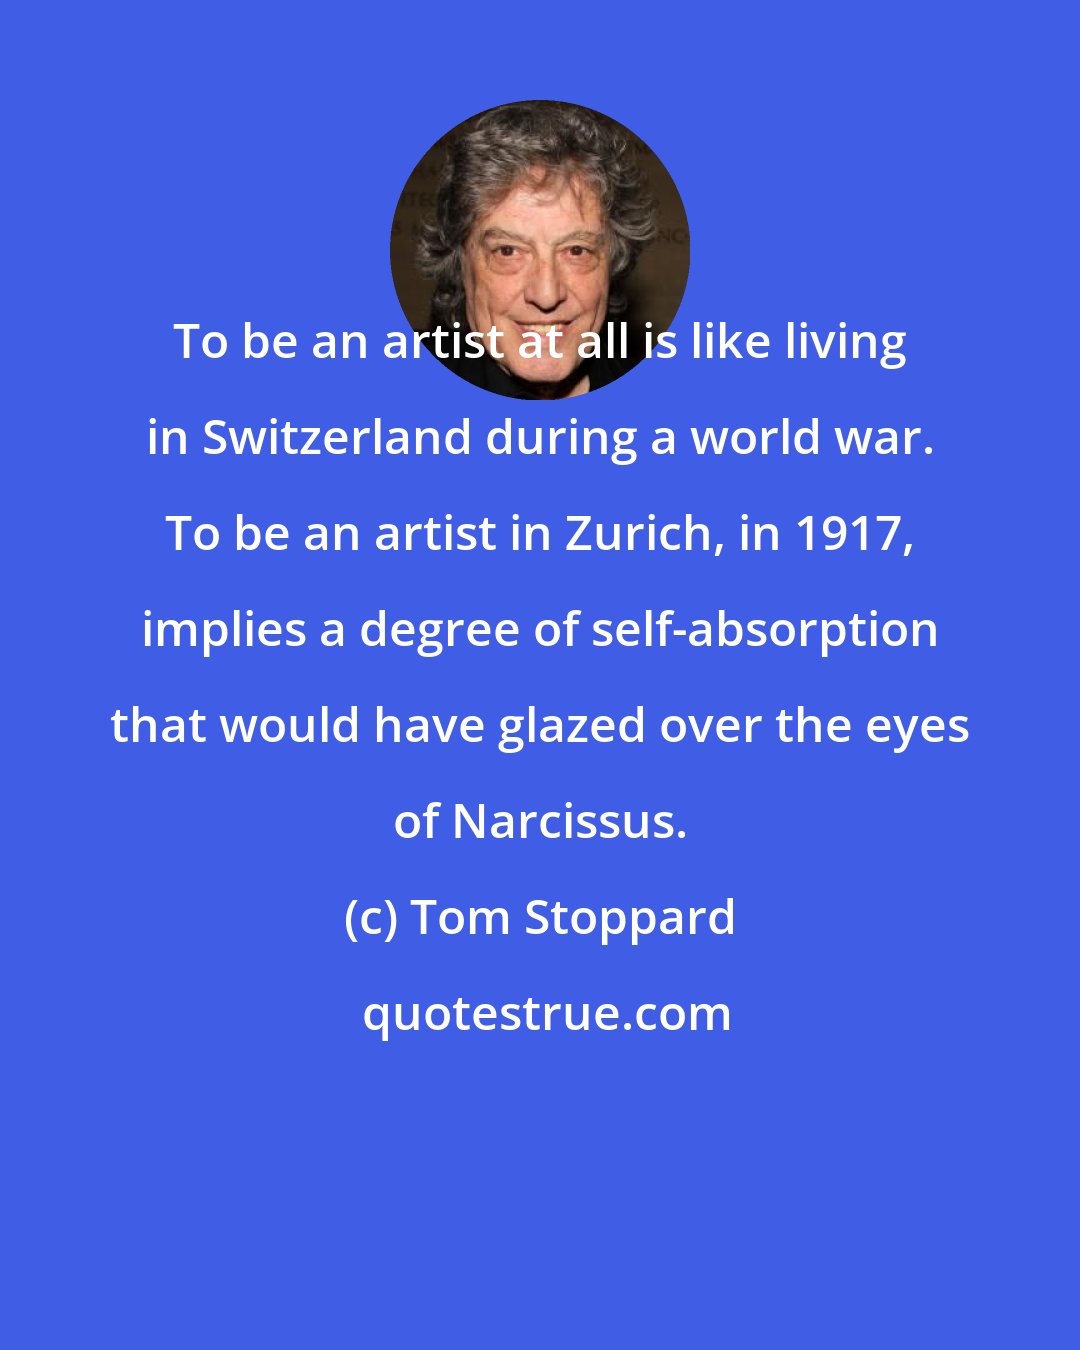 Tom Stoppard: To be an artist at all is like living in Switzerland during a world war. To be an artist in Zurich, in 1917, implies a degree of self-absorption that would have glazed over the eyes of Narcissus.